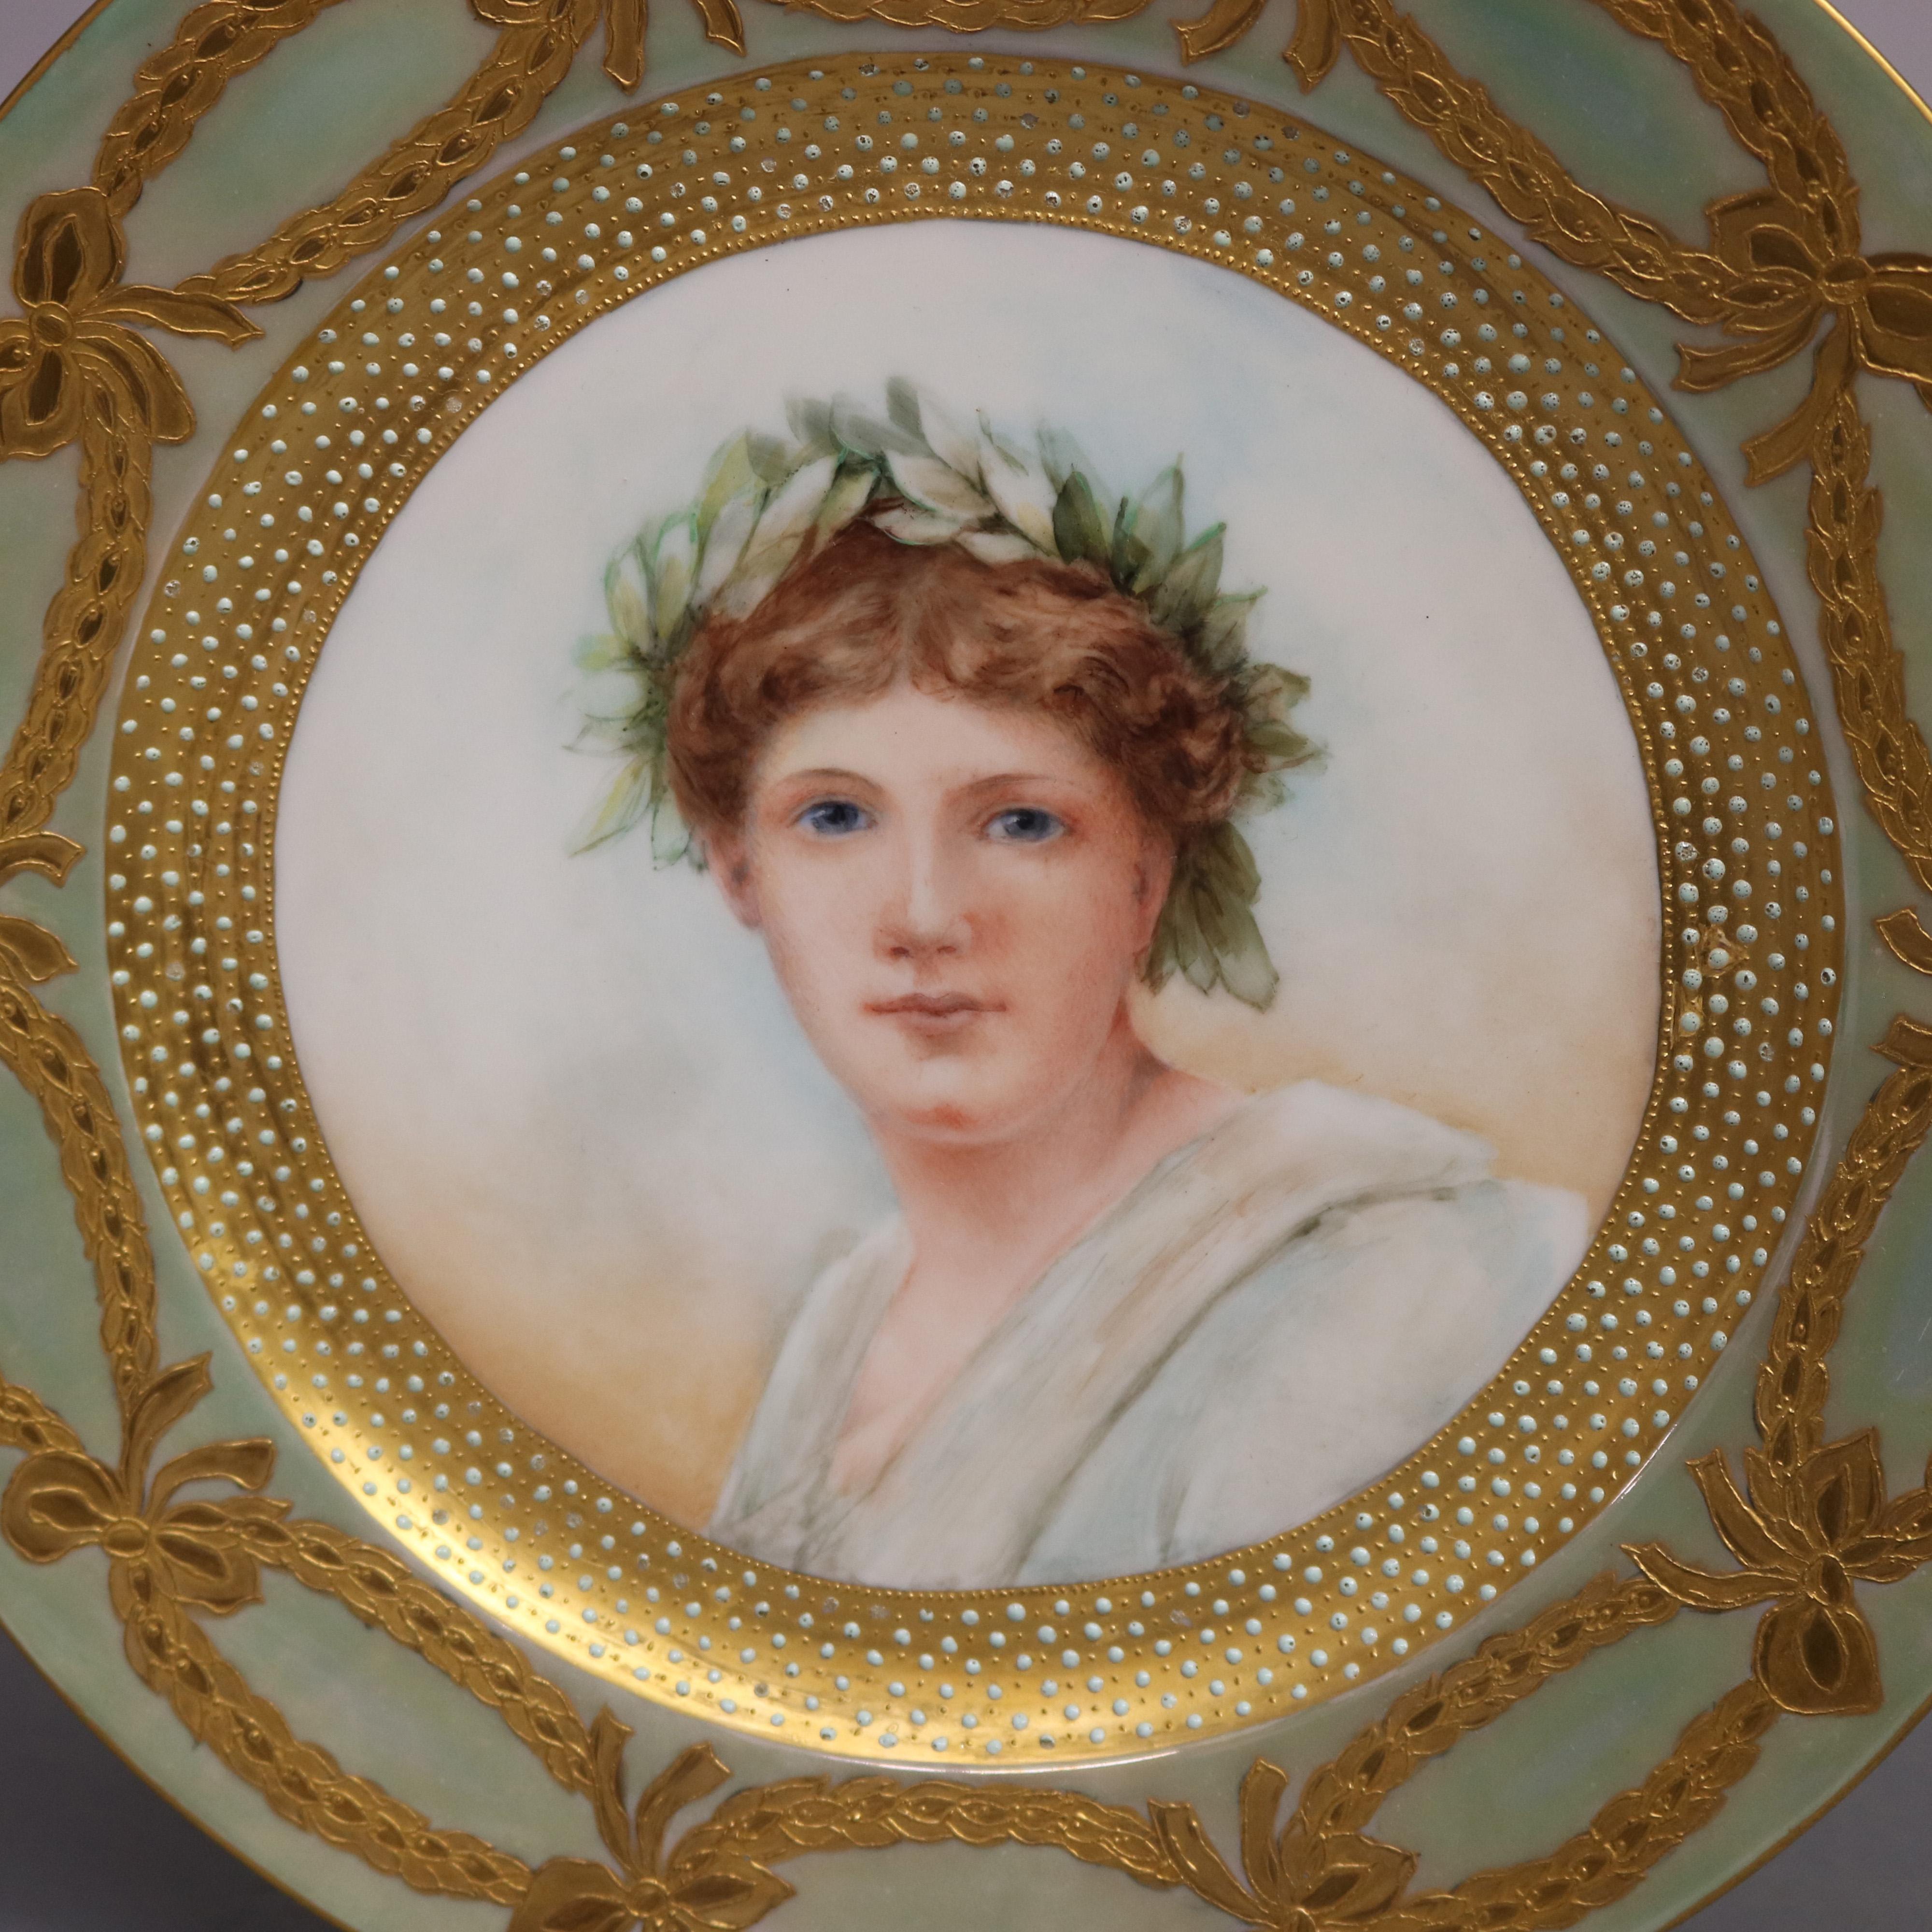 Antique French Limoges portrait plate features well with portrait of young woman in oak leaf crown, rim decorated with gilt ribbon and bow motif, en verso artist signed Scluette, 19th century

Measures: 1